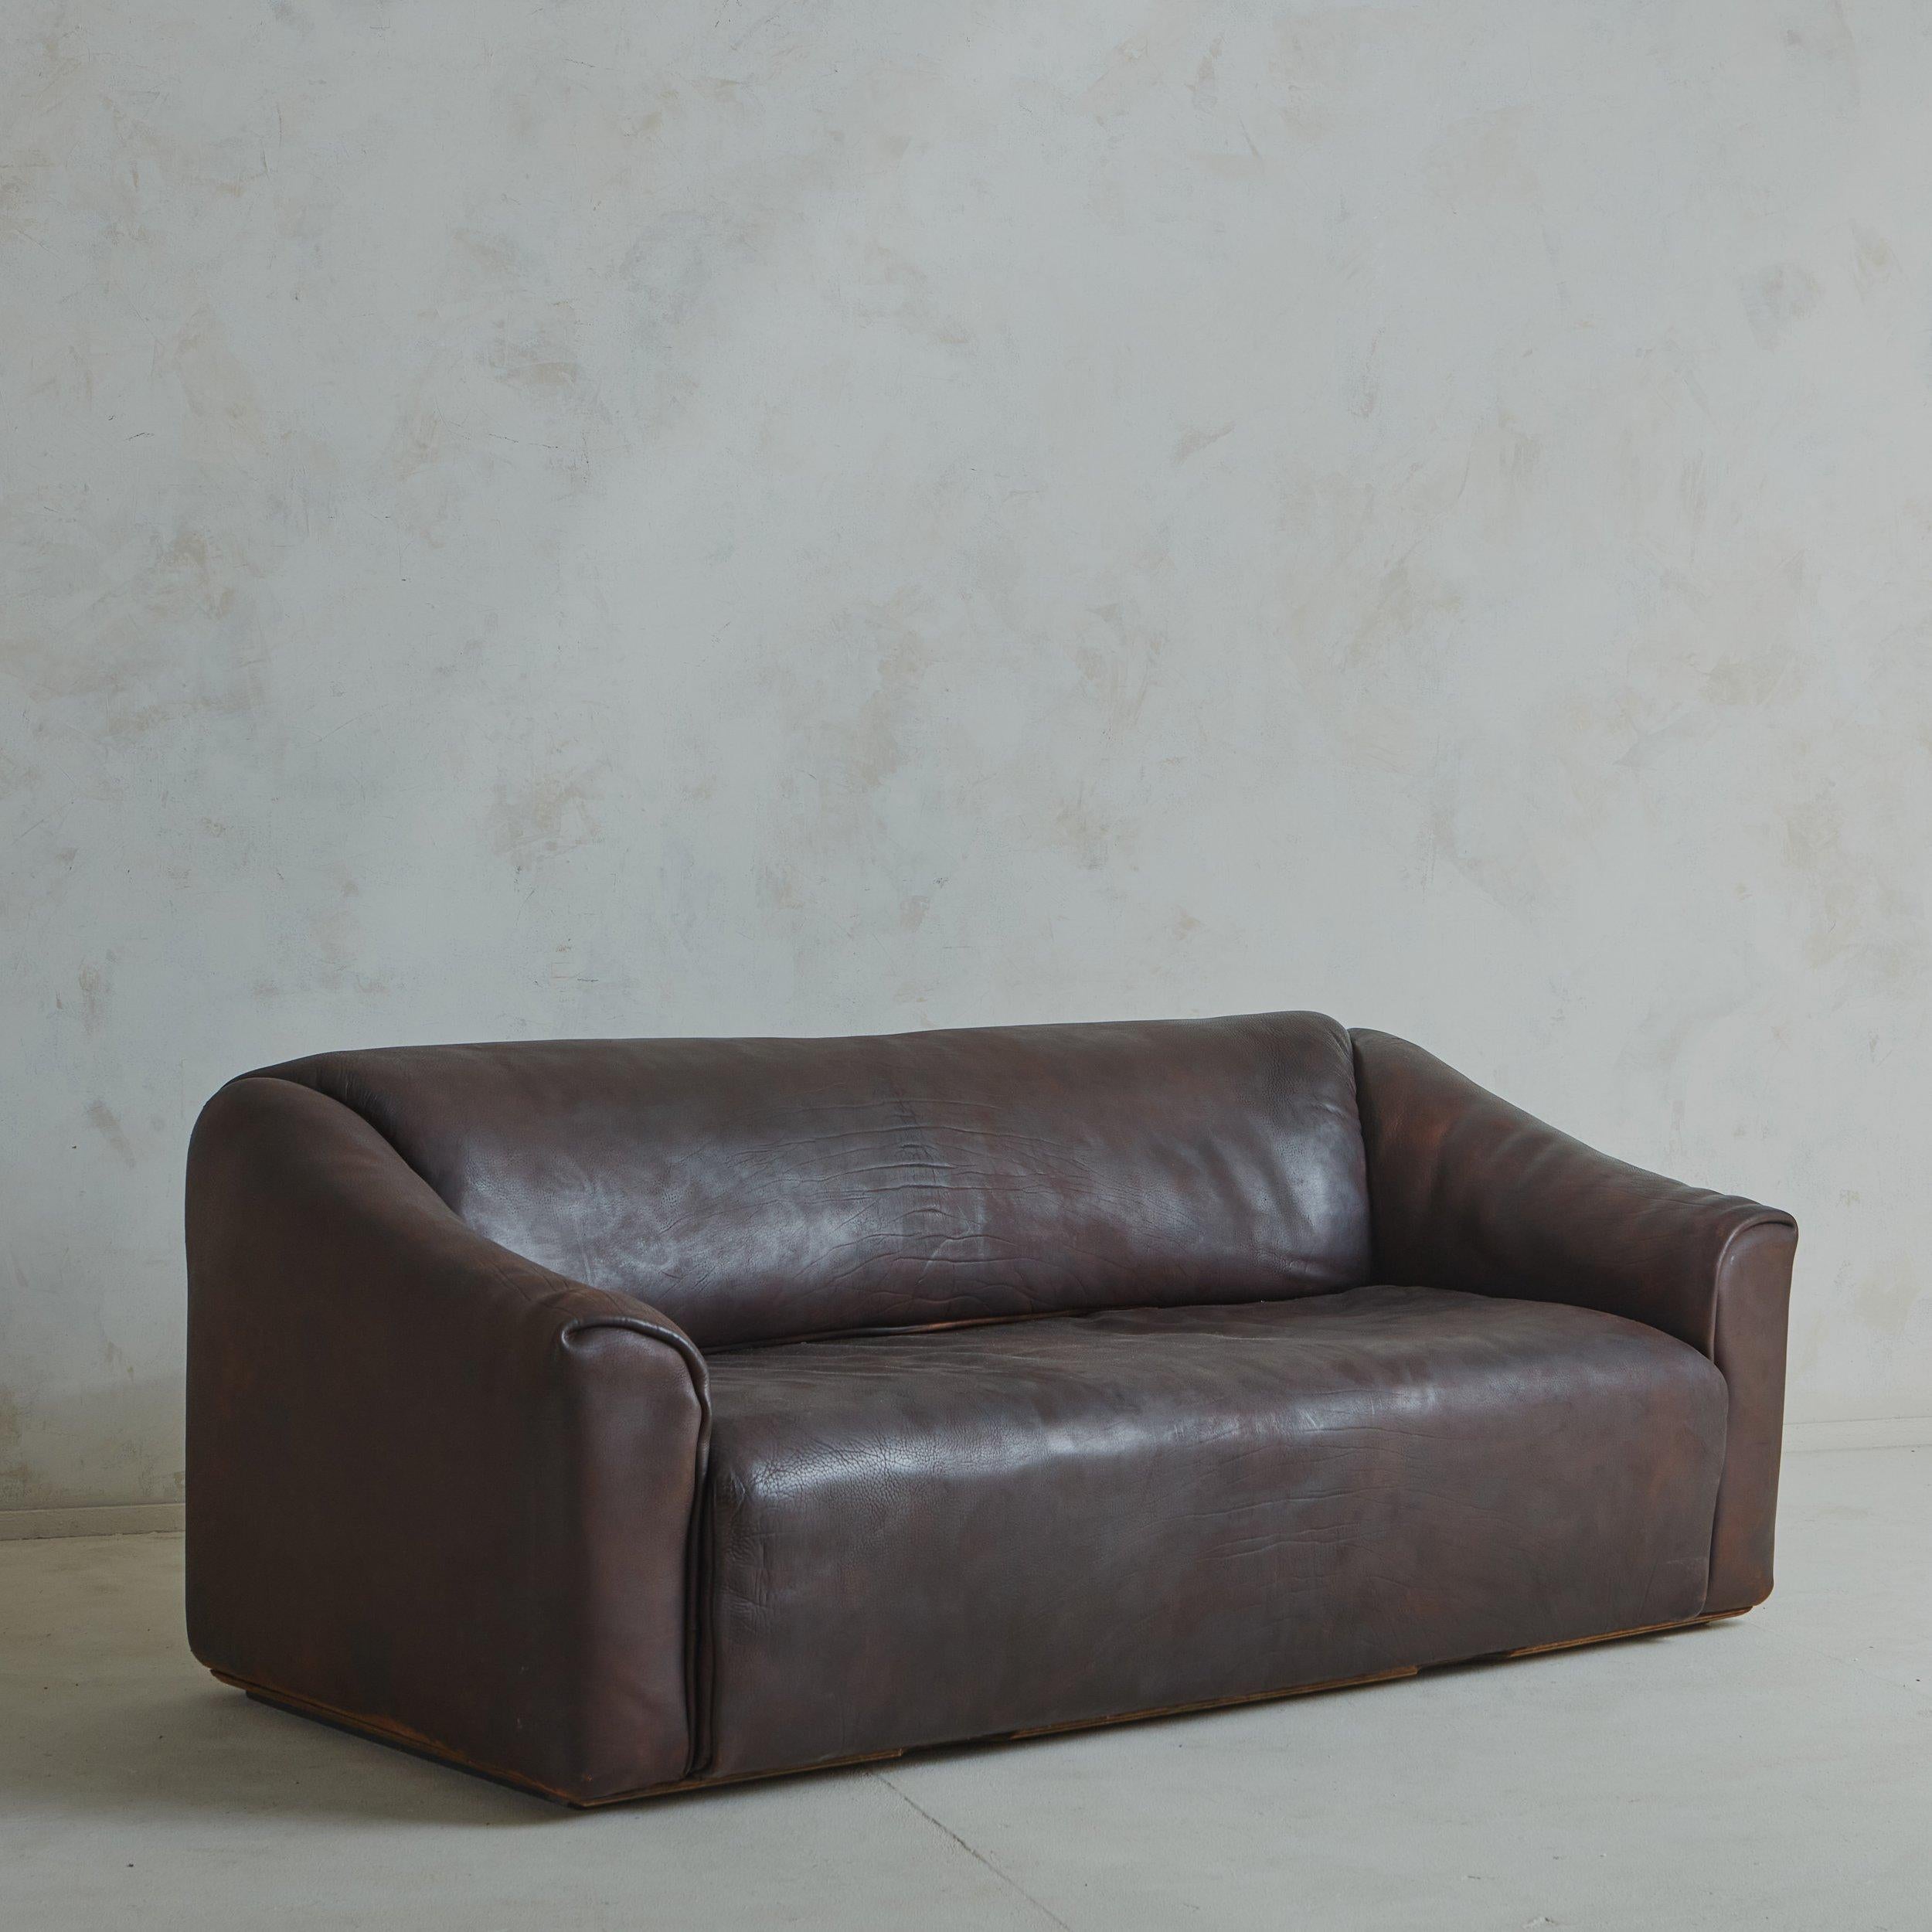 Modern Two-Seat ‘DS-47’ Sofa in Buffalo Leather by De Sede, Switzerland 1970s For Sale